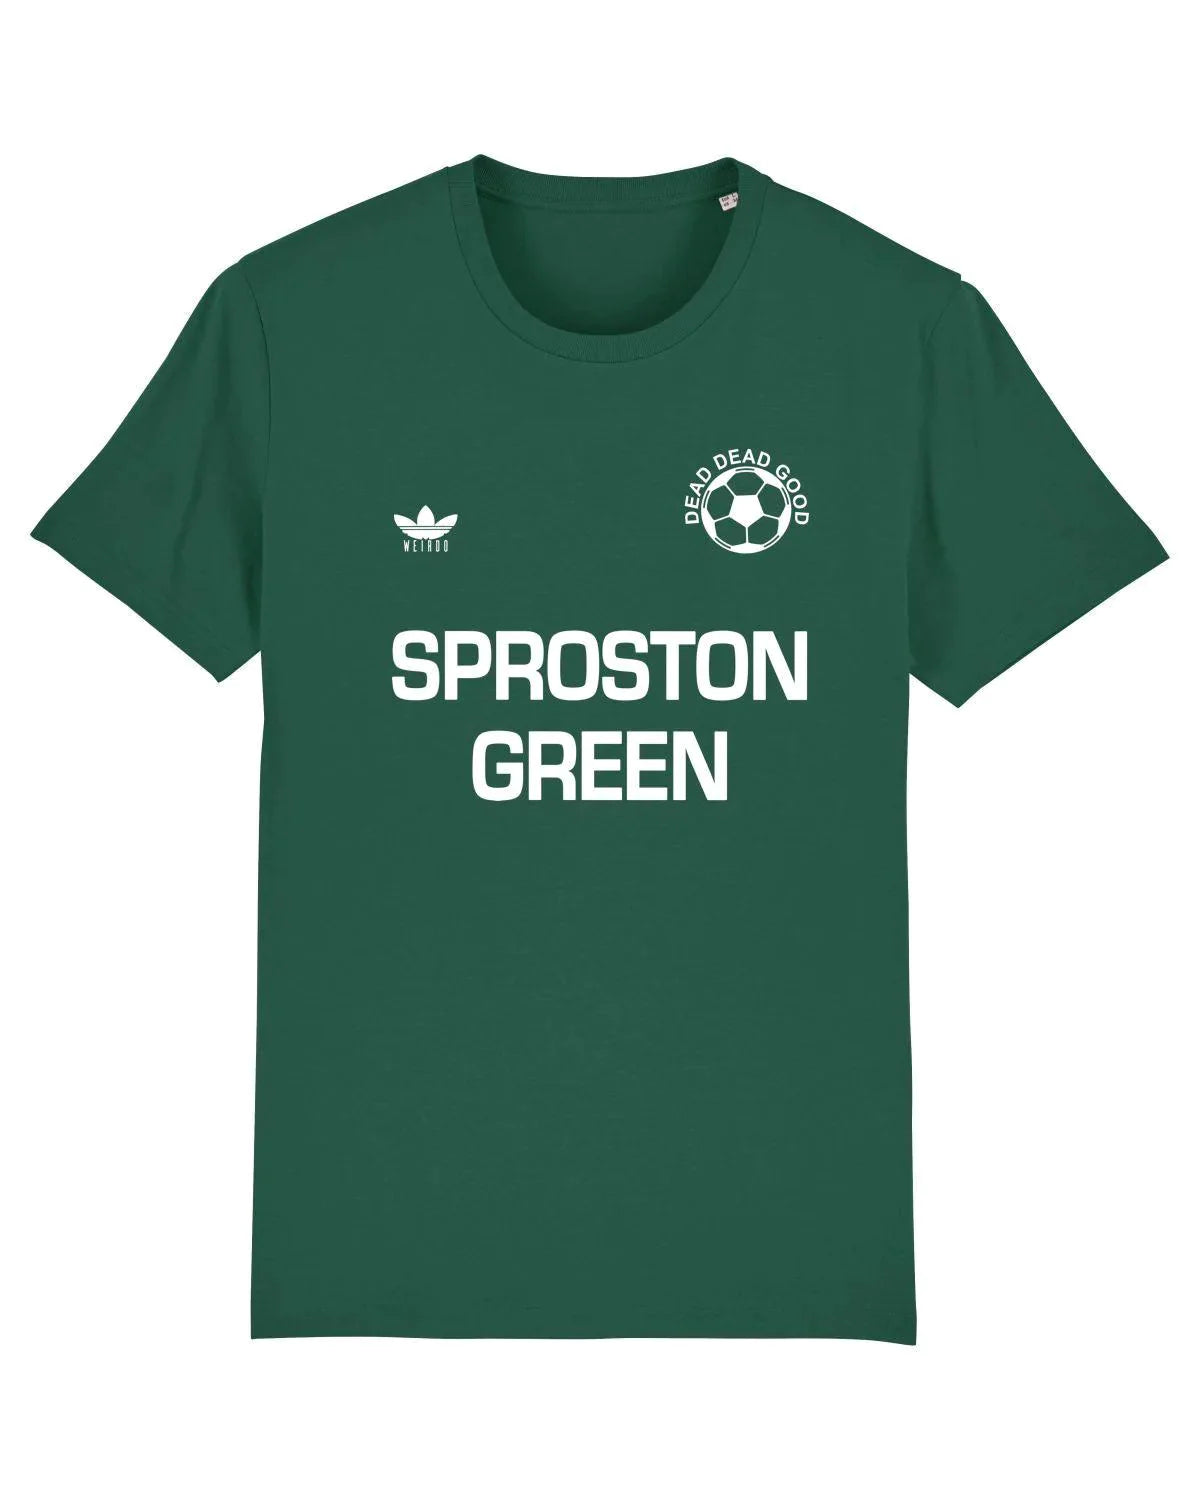 SPROSTON GREEN: T-Shirt Inspired by The Charlatans & Football - SOUND IS COLOUR